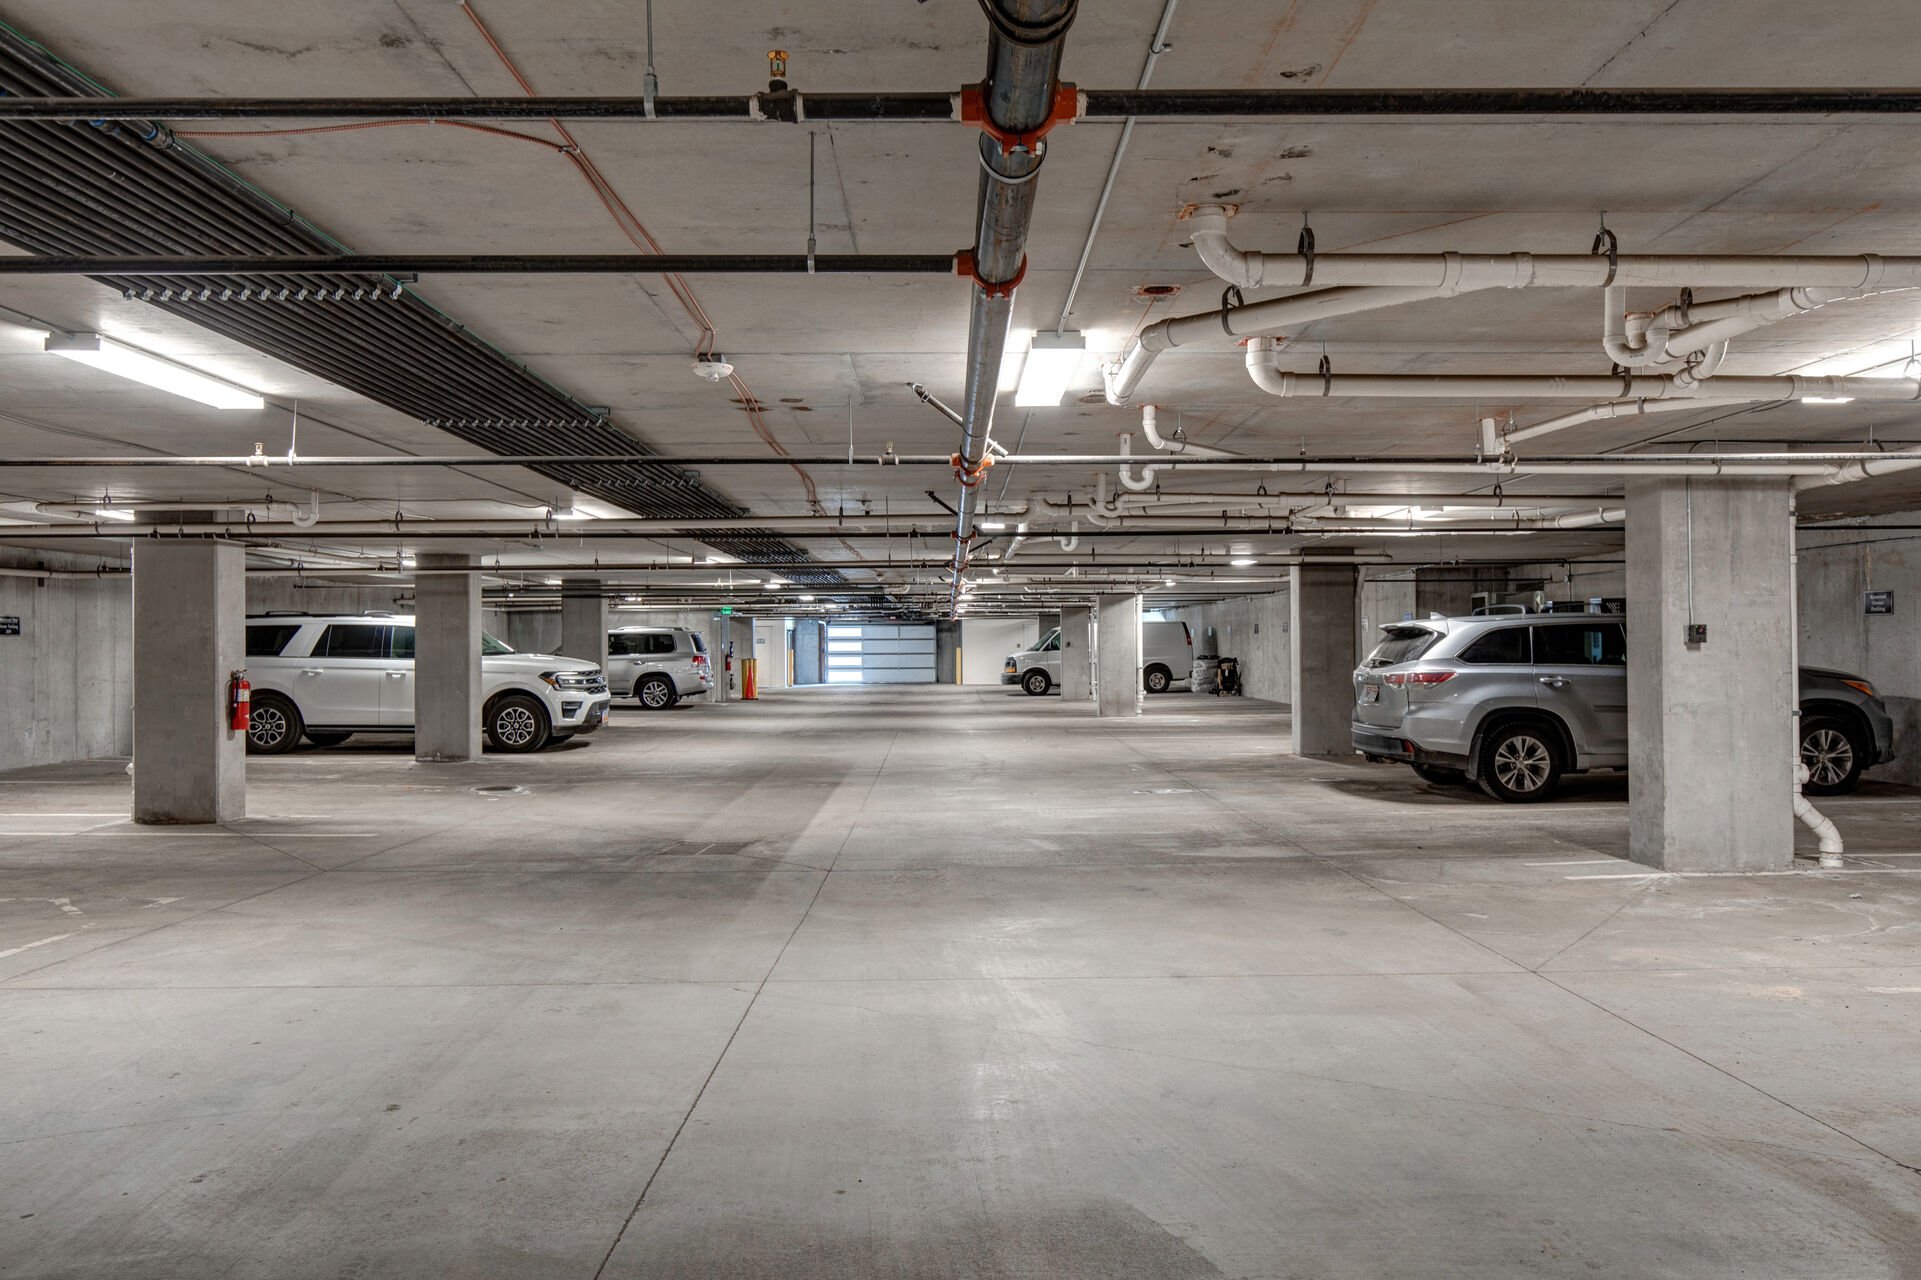 Communal garage with one assigned parking space